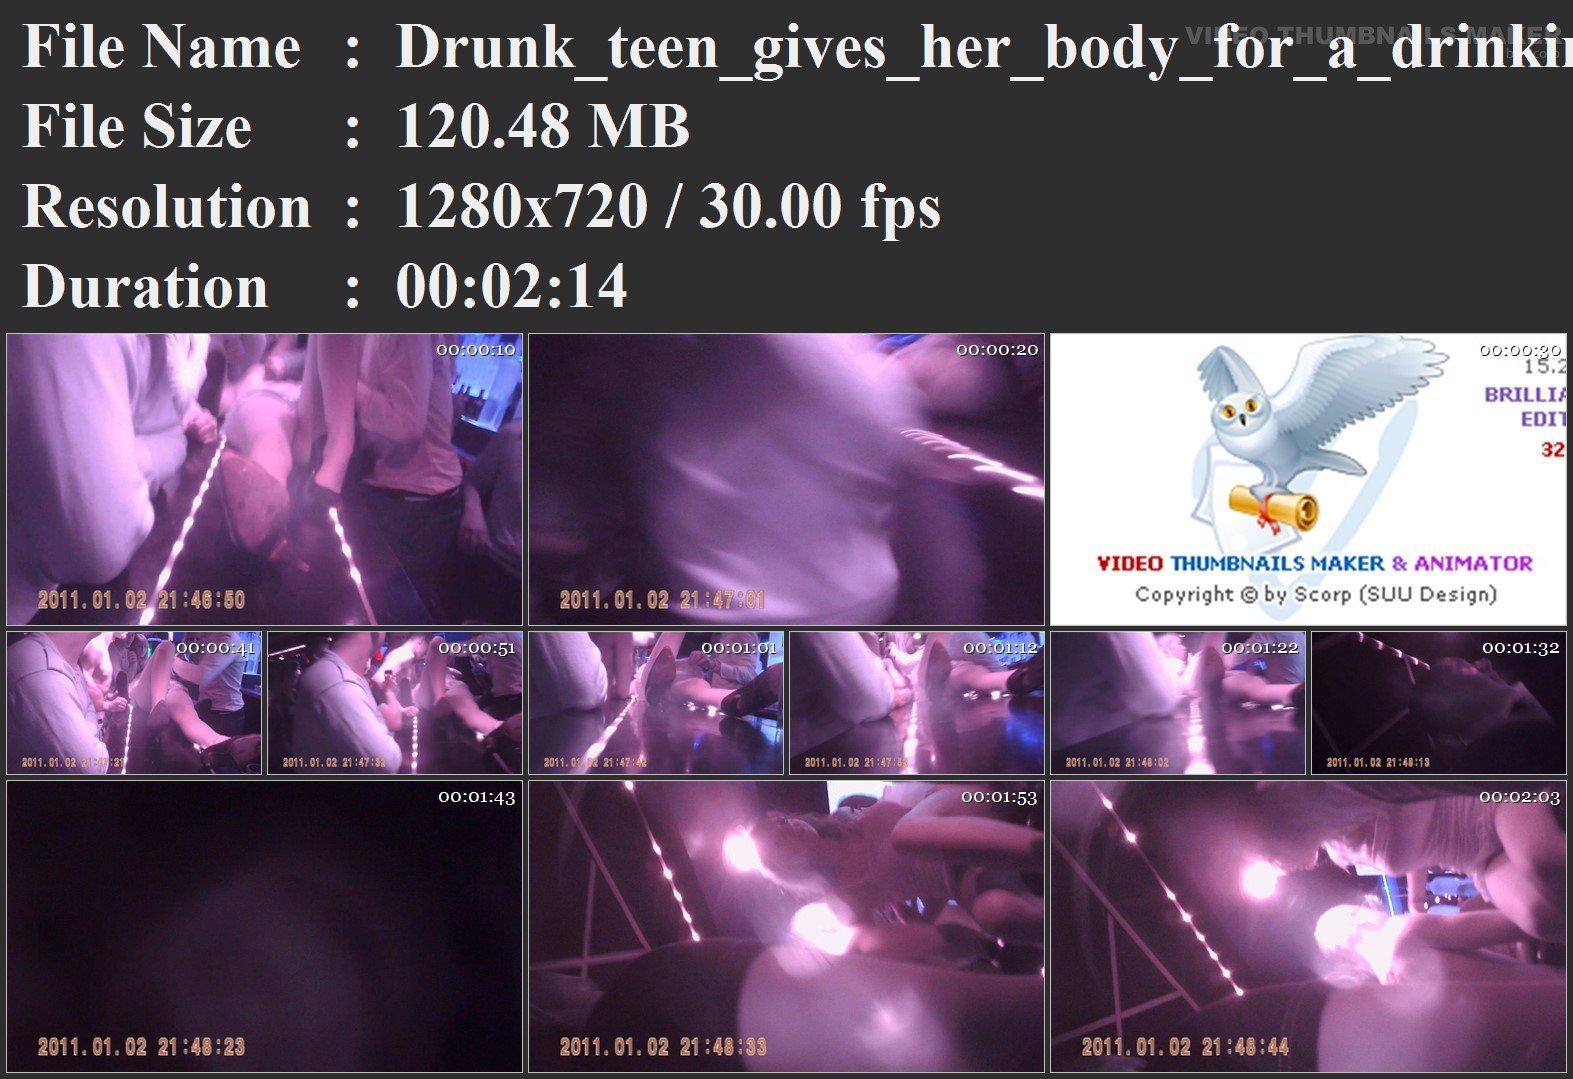 Drunk_teen_gives_her_body_for_a_drinking_body_shot.mov.jpg